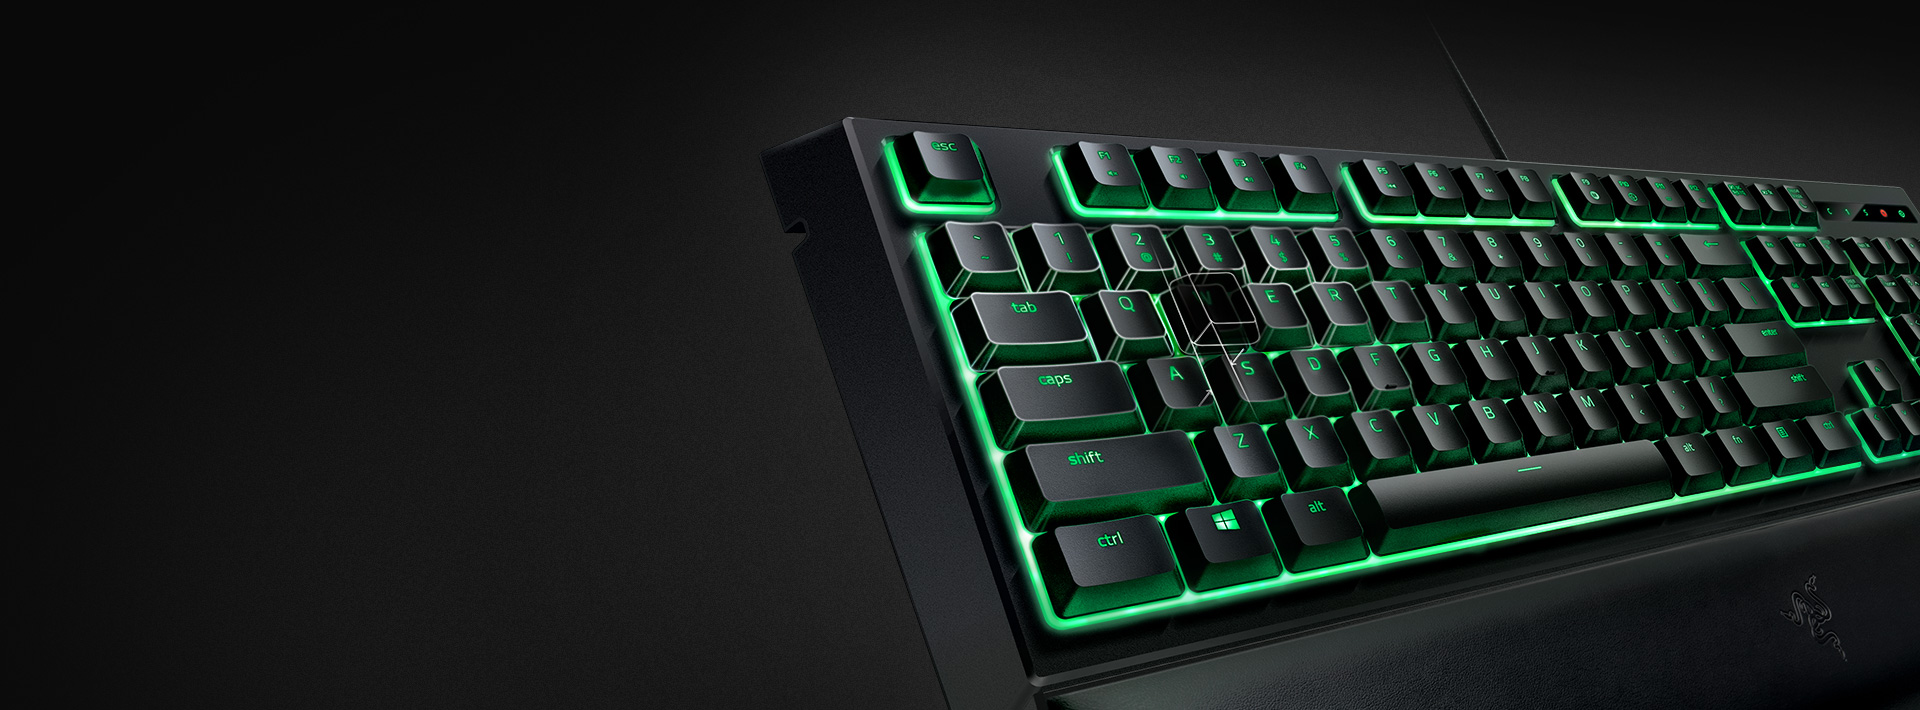 http://assets.razerzone.com/eeimages/products/25675/keycaps_bg_red.jpg